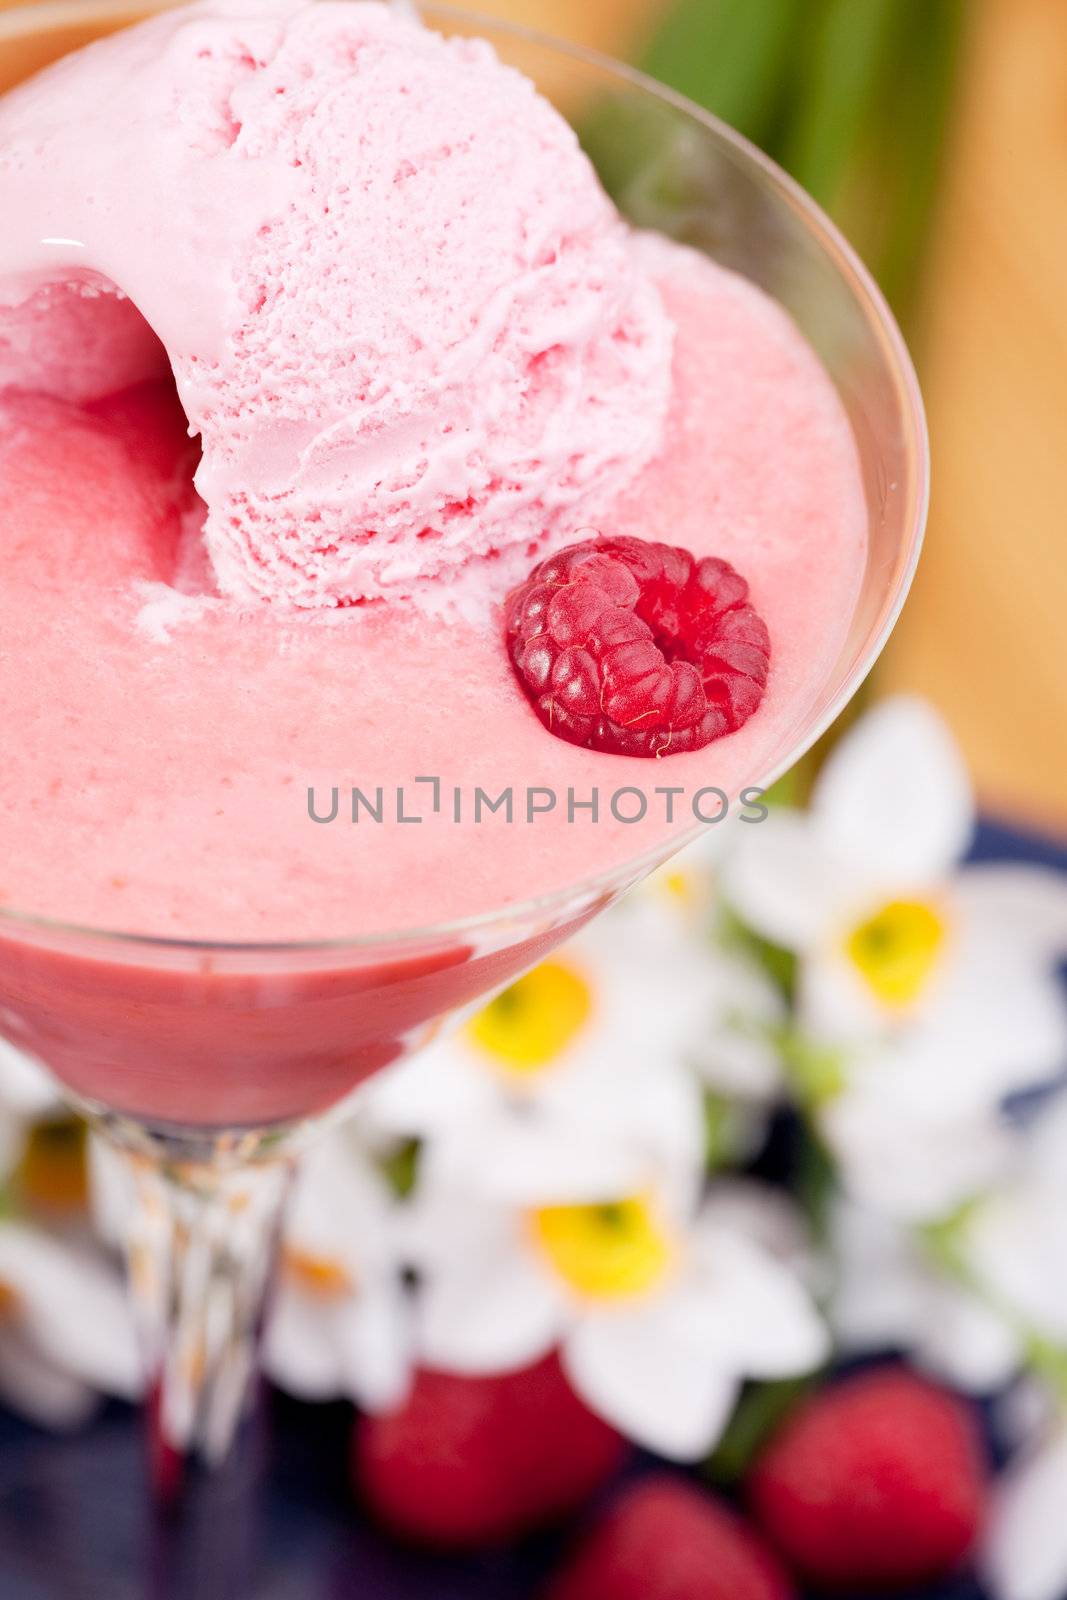 A smoothie with ice cream and raspberries